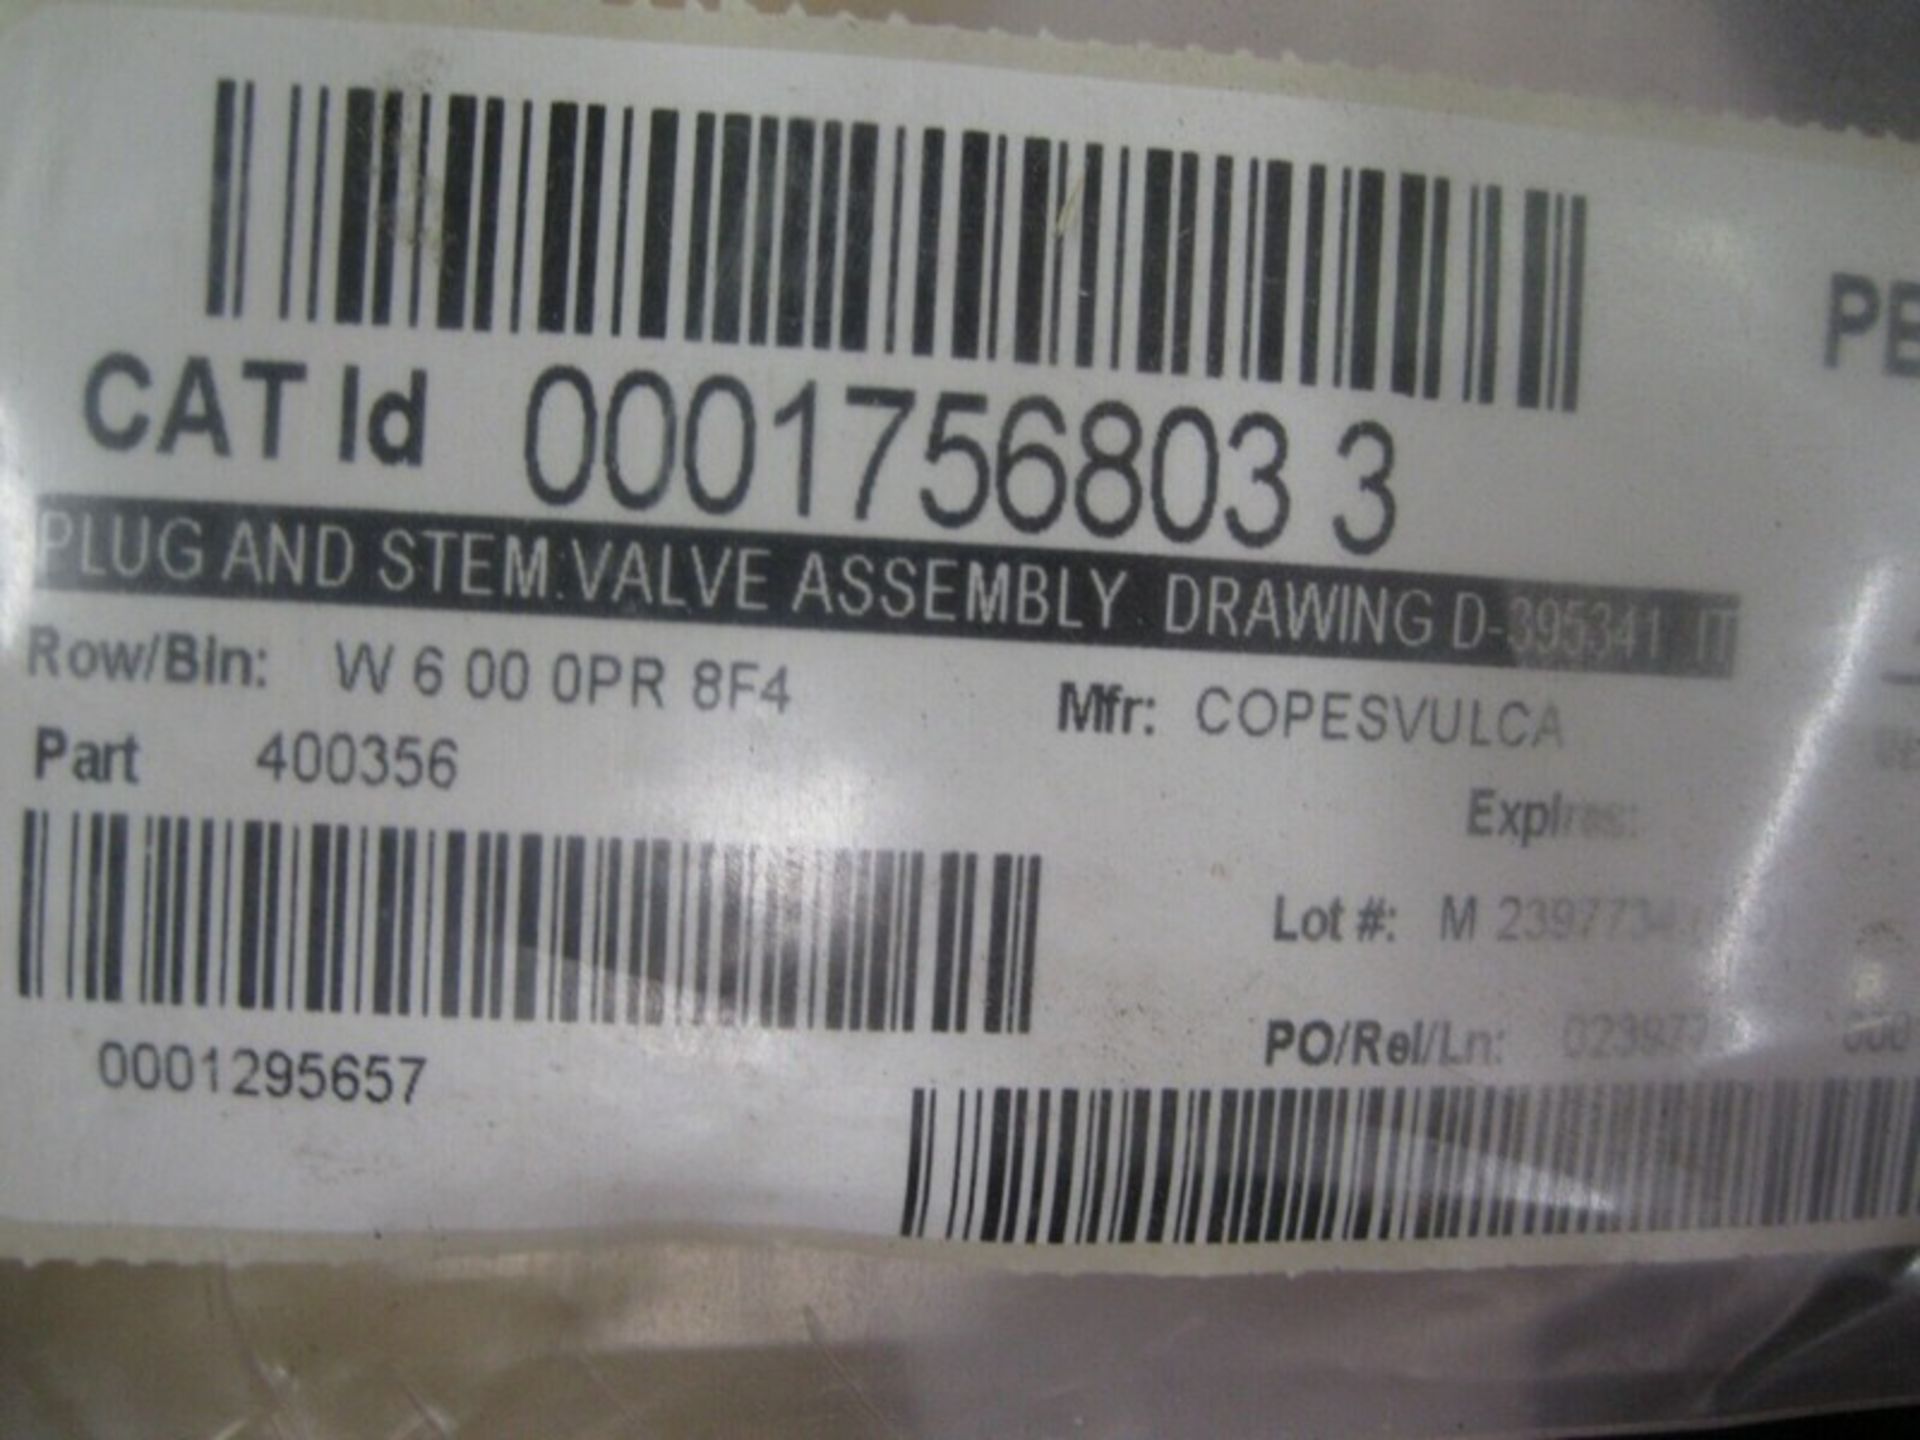 Copes Vulcan 400356 Plug/Stem Valve Assembly NEW(NOTE: Packing and Palletizing Can Be Provided By - Image 3 of 3